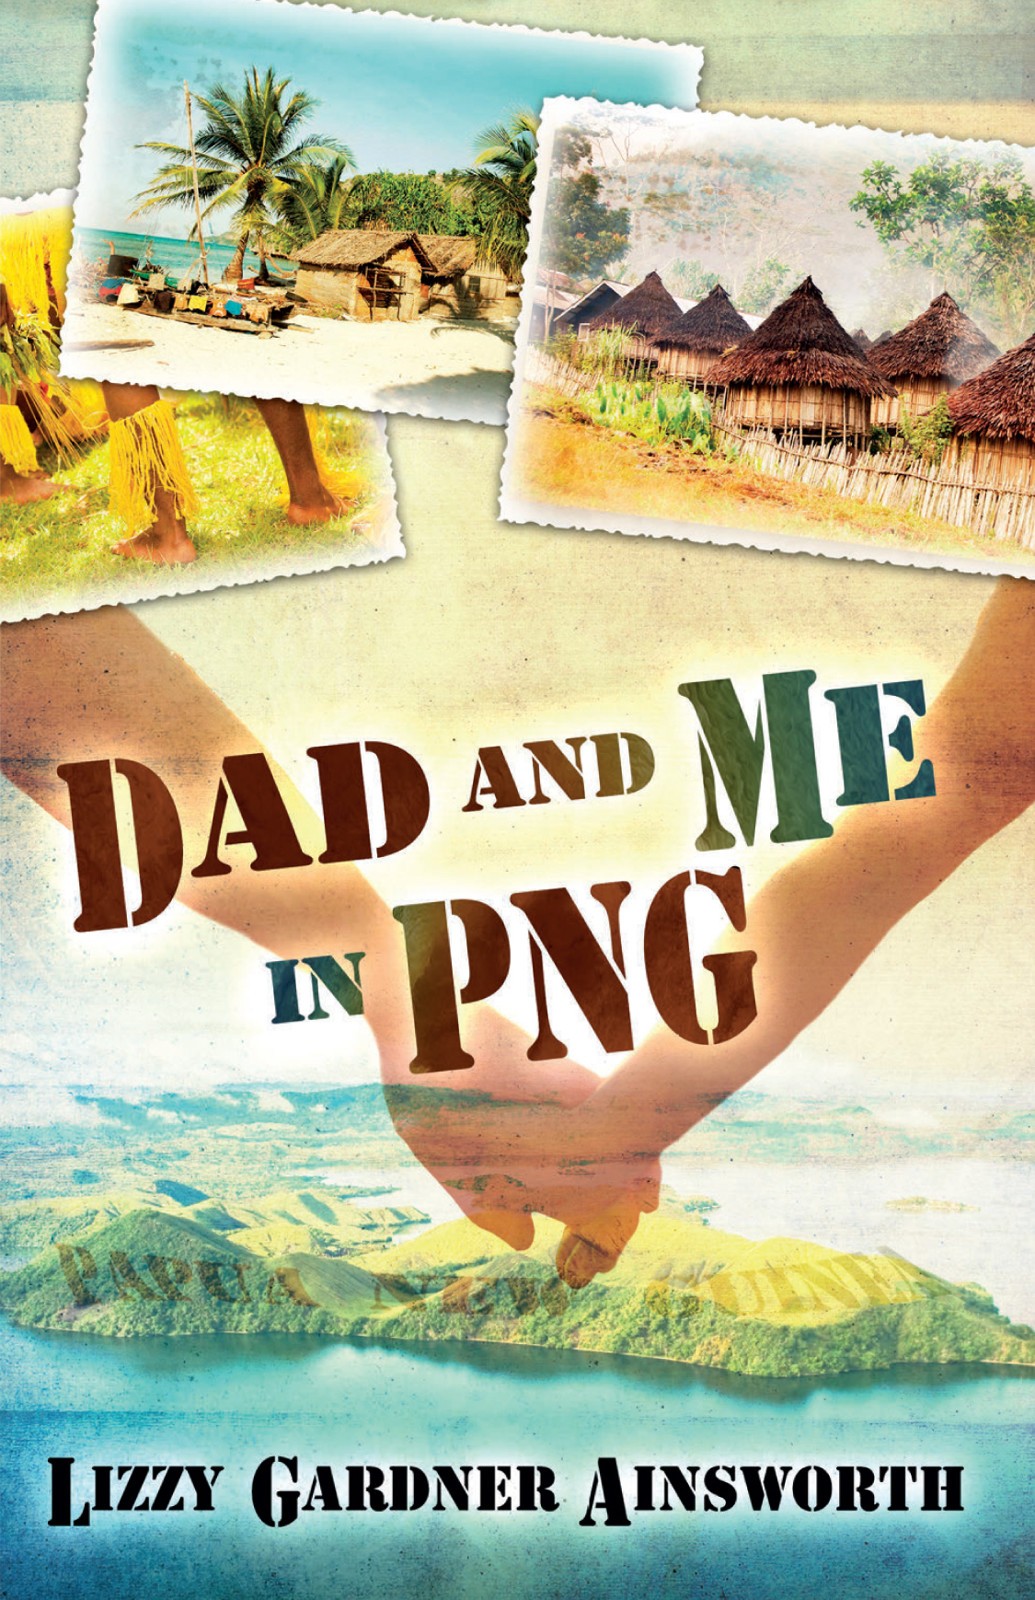 Dad and Me in PNG